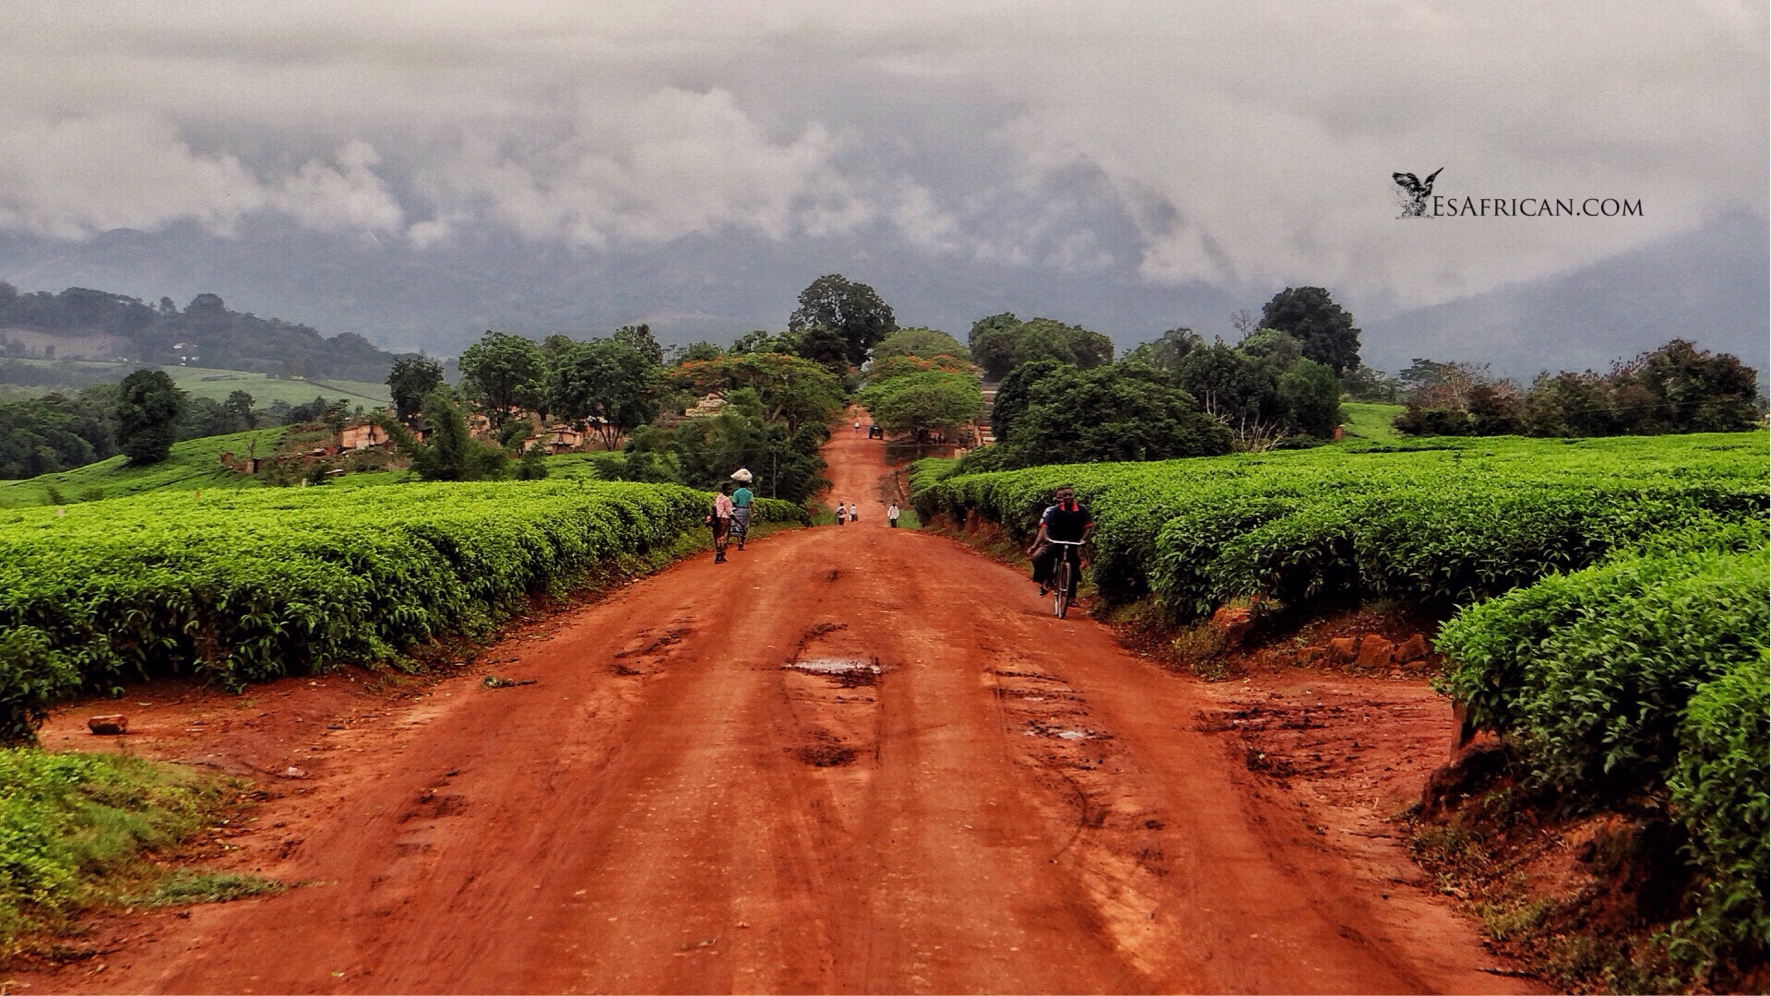 Although the main roads are well known visitors may find they need other roads. Unless the driver is local to the area there are many opportunities for getting lost. This road is one of many that form a maze within a tea estate near Mulanje, but this is an important area for reaching some good hiking routes up Mulanje Mountain.